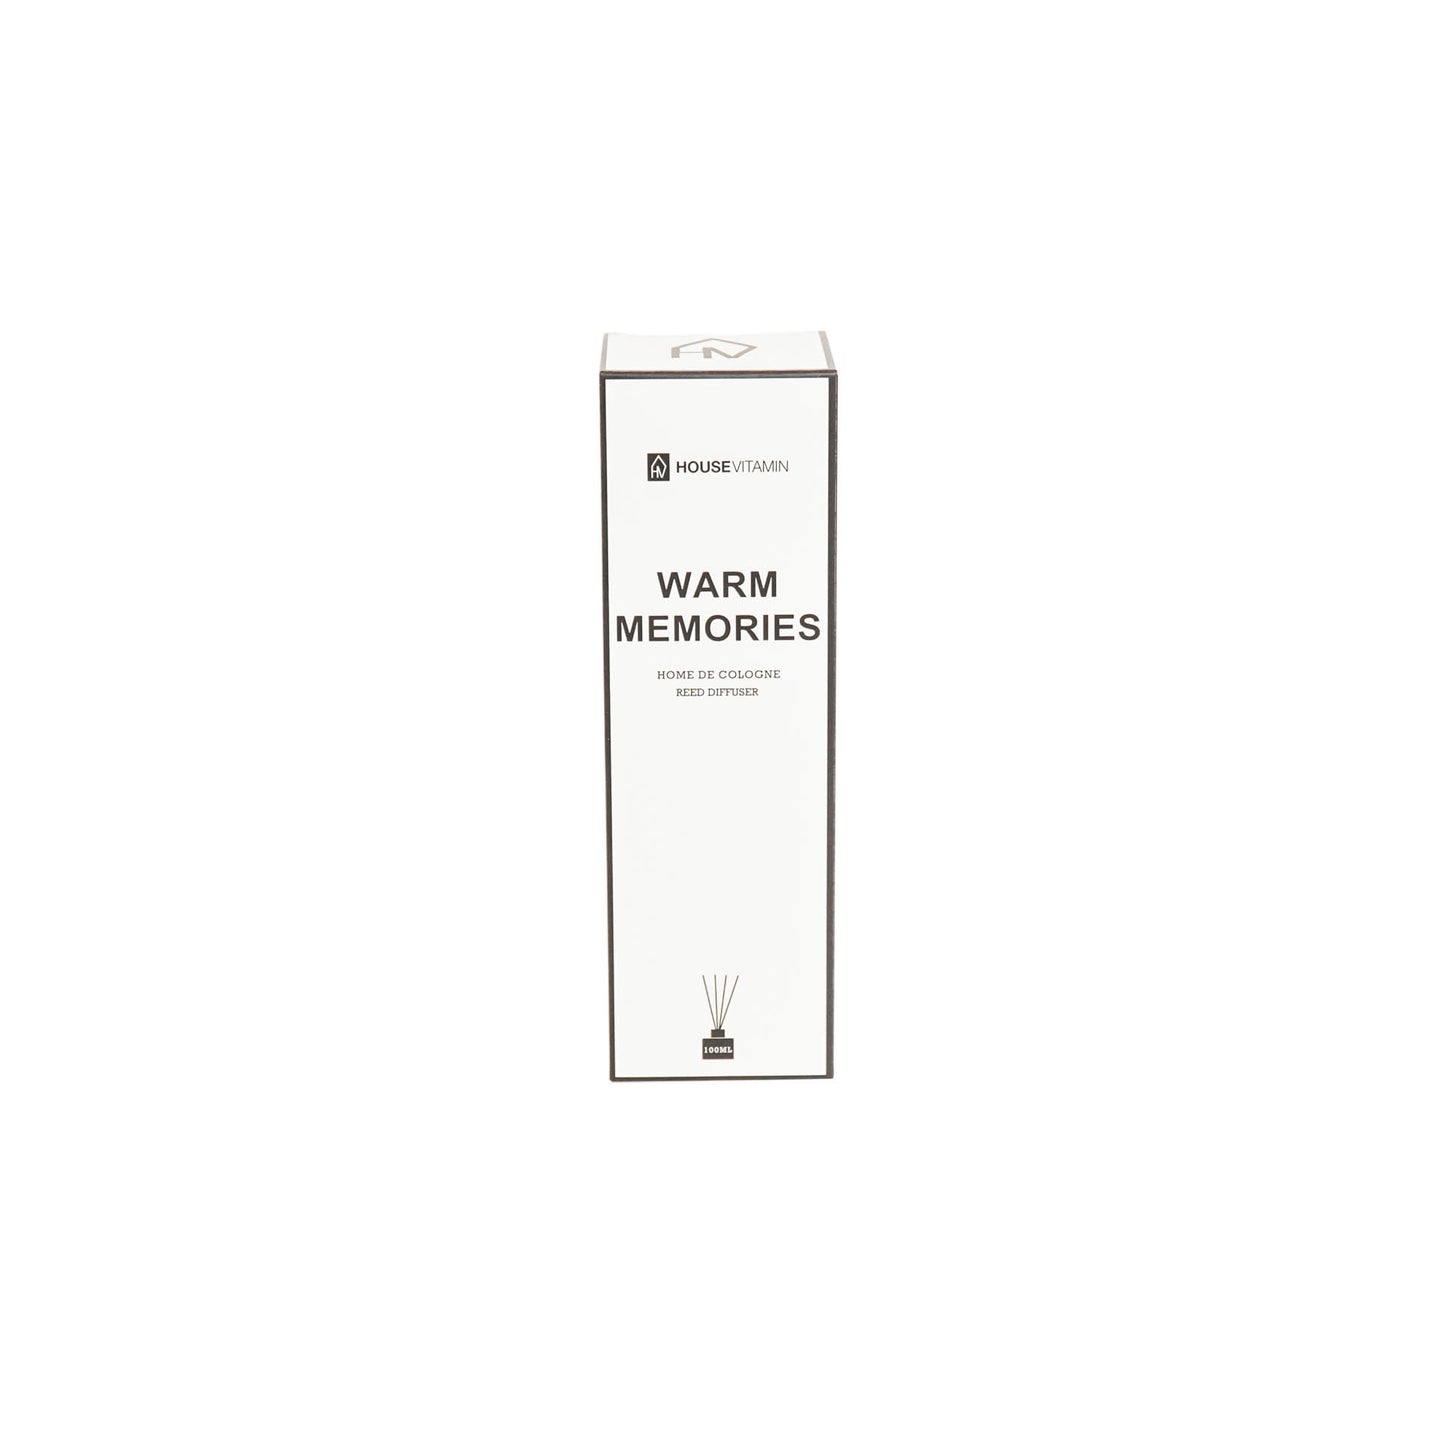 HV Home de Cologne Reed Diffusers - 100 ml - Warm memories